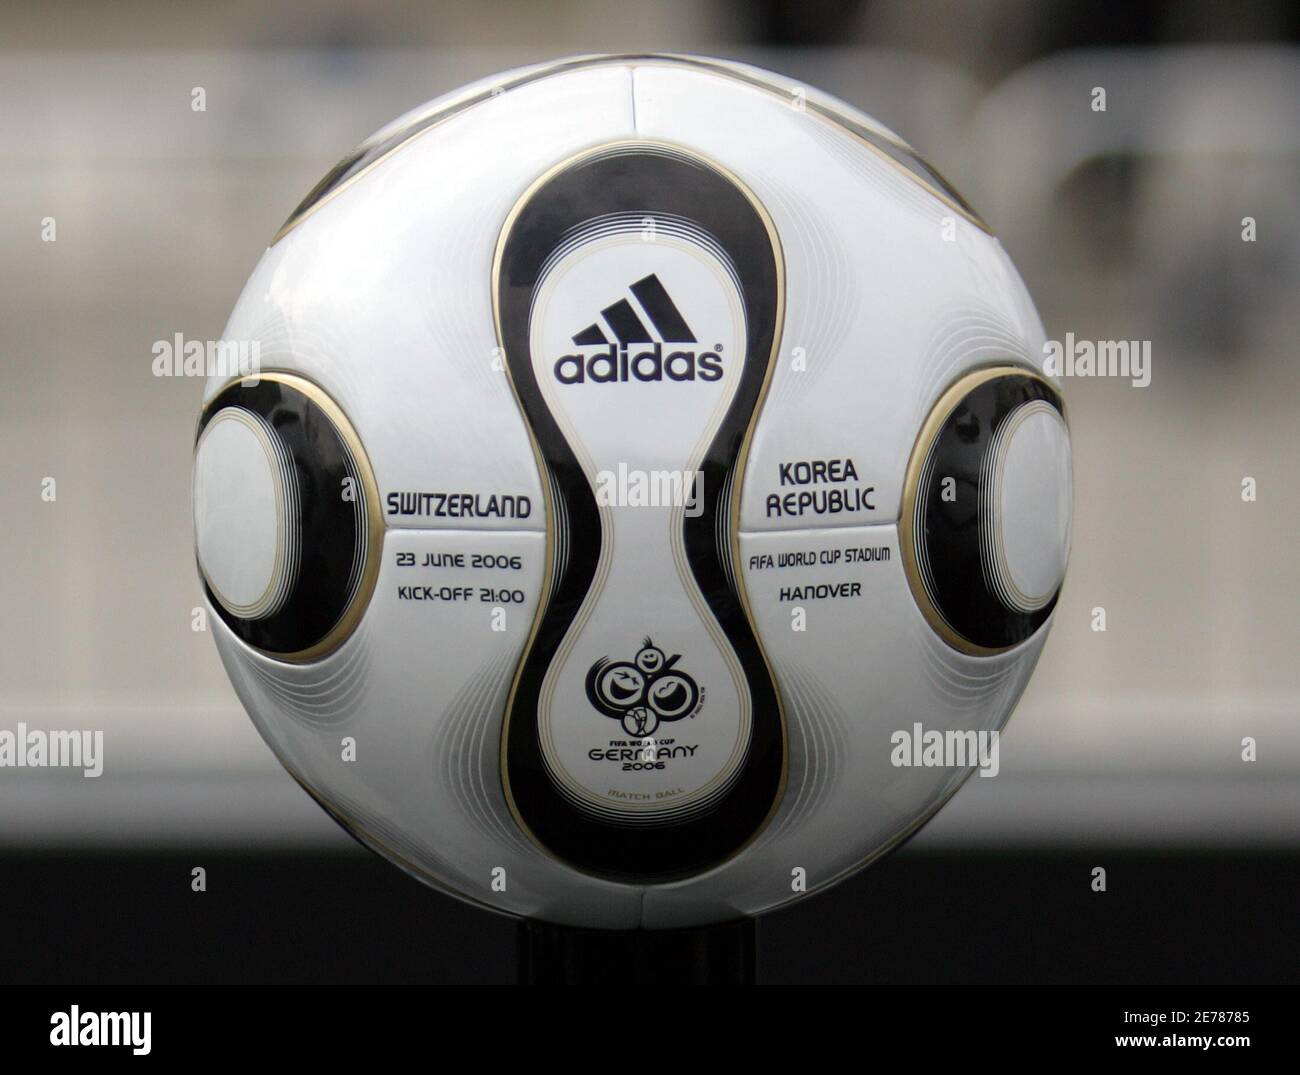 The soccer ball for the FIFA 2006 Soccer World Cup match between  Switzerland and South Korea in Hanover is presented to the media in Berlin  April 18, 2006. Franz Beckenbauer (L), President